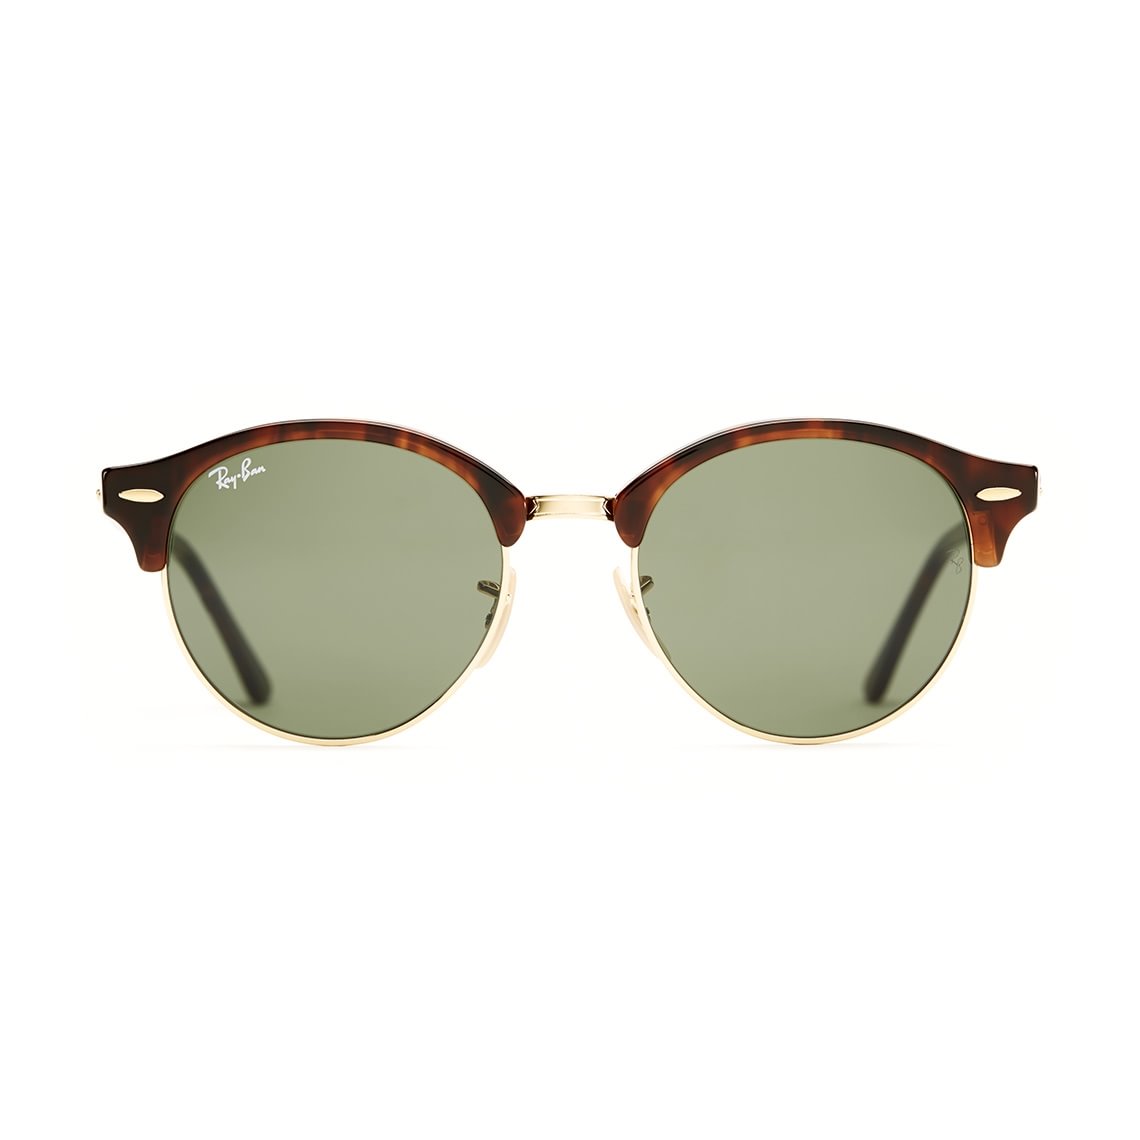 Ray-Ban Clubround RB4246 990 51